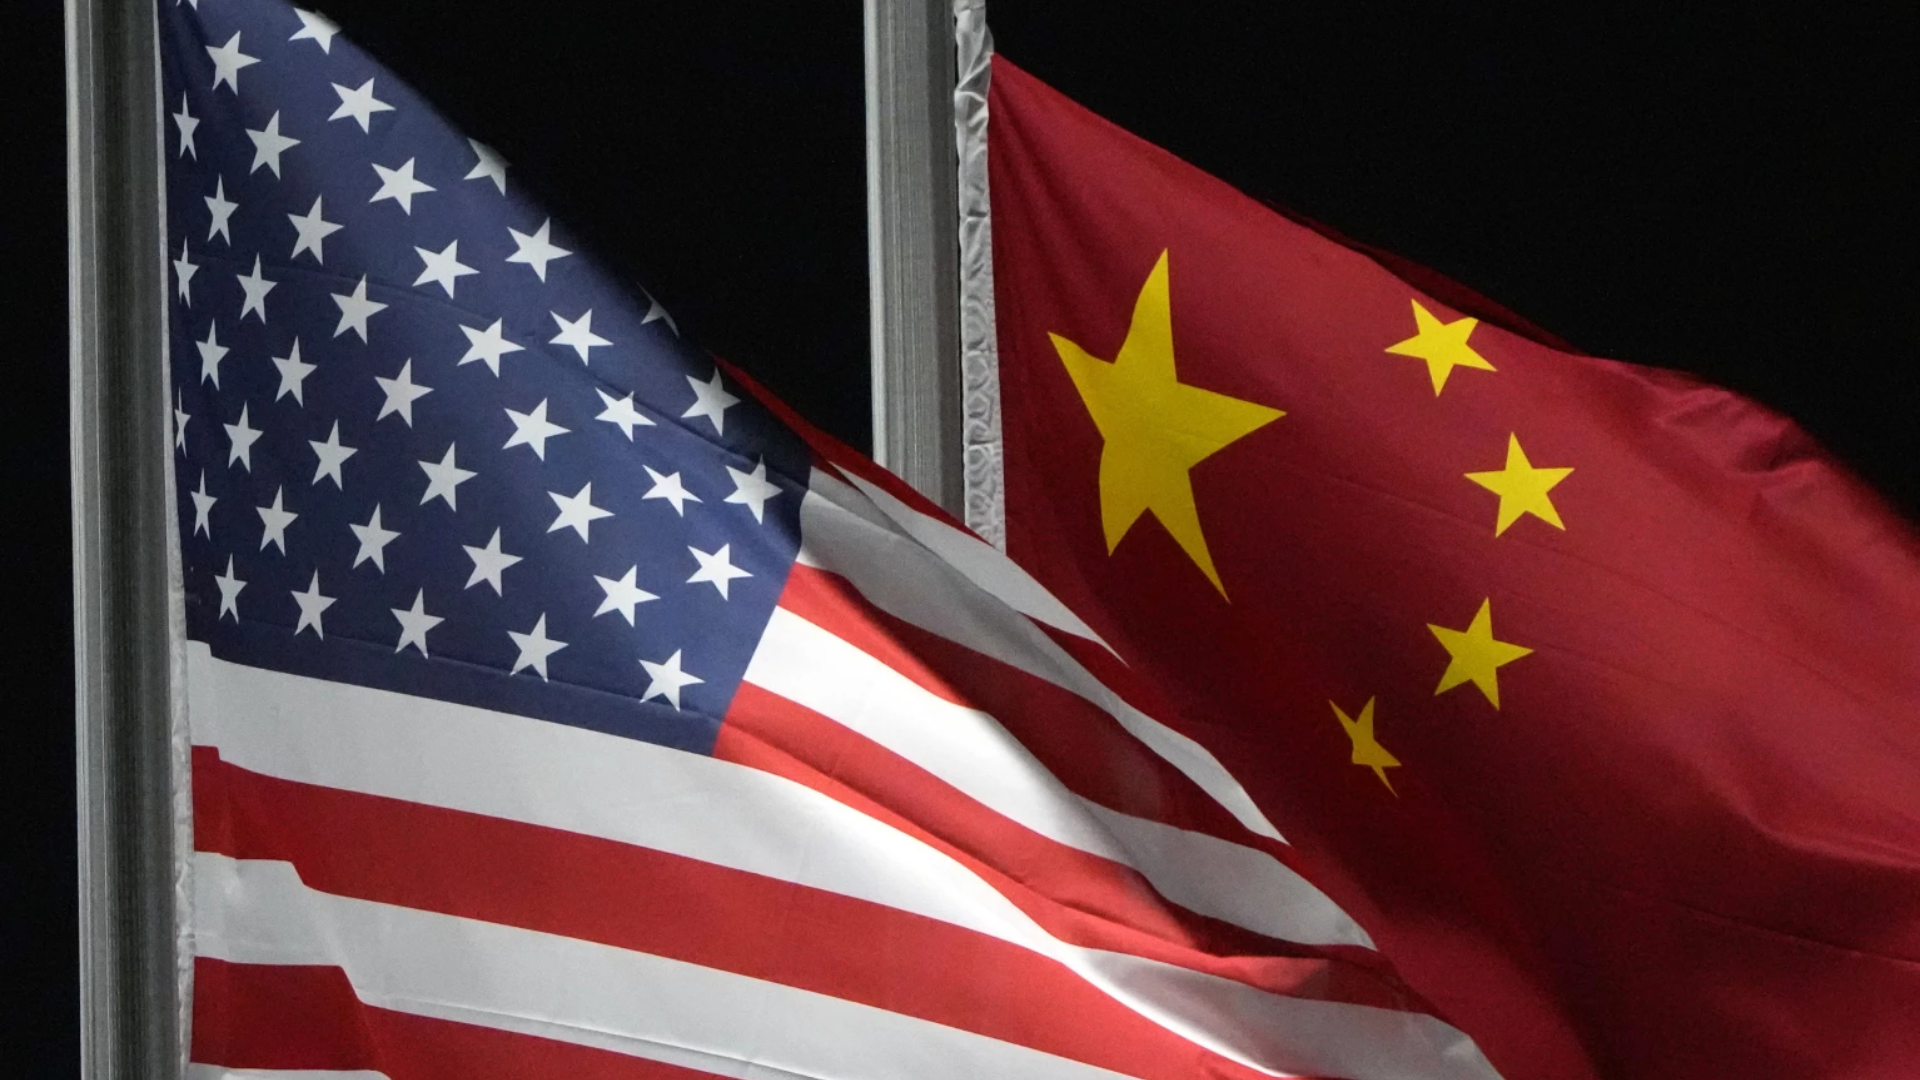 Amid tensions with China, some US states are purging Chinese companies from their investments